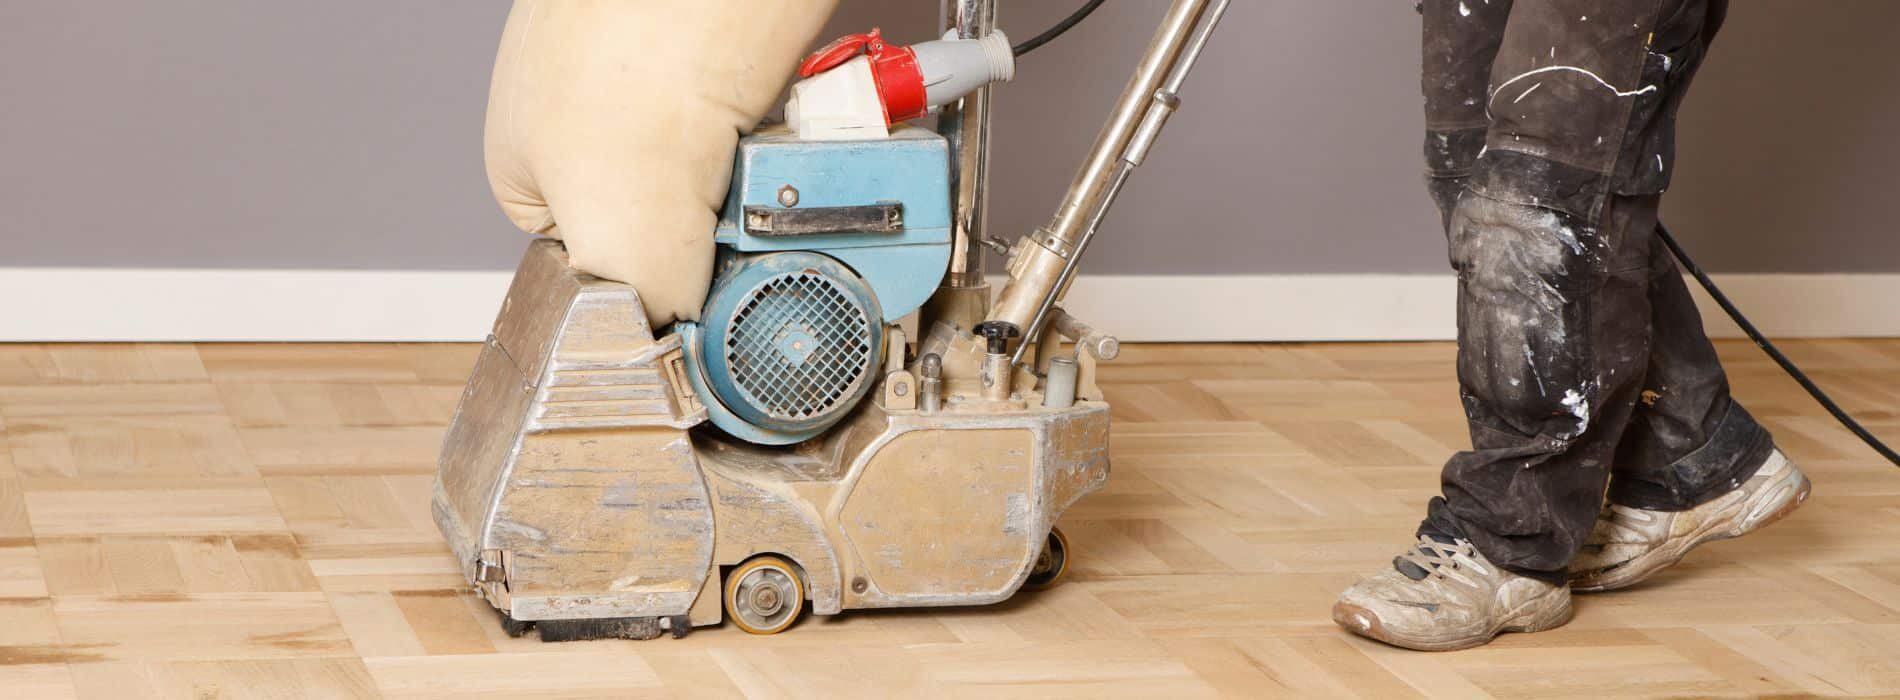 In Charlton, SE7, Mr Sander® using a Bona Belt sander to sand a parquet floor. The machine runs on 2.4 kW of power and requires a voltage of 230 V with a frequency of 50 Hz/60 Hz. The sander has a size of 250x750 mm and is connected to a dust extraction system that includes a HEPA filter, ensuring a clean and efficient sanding process.